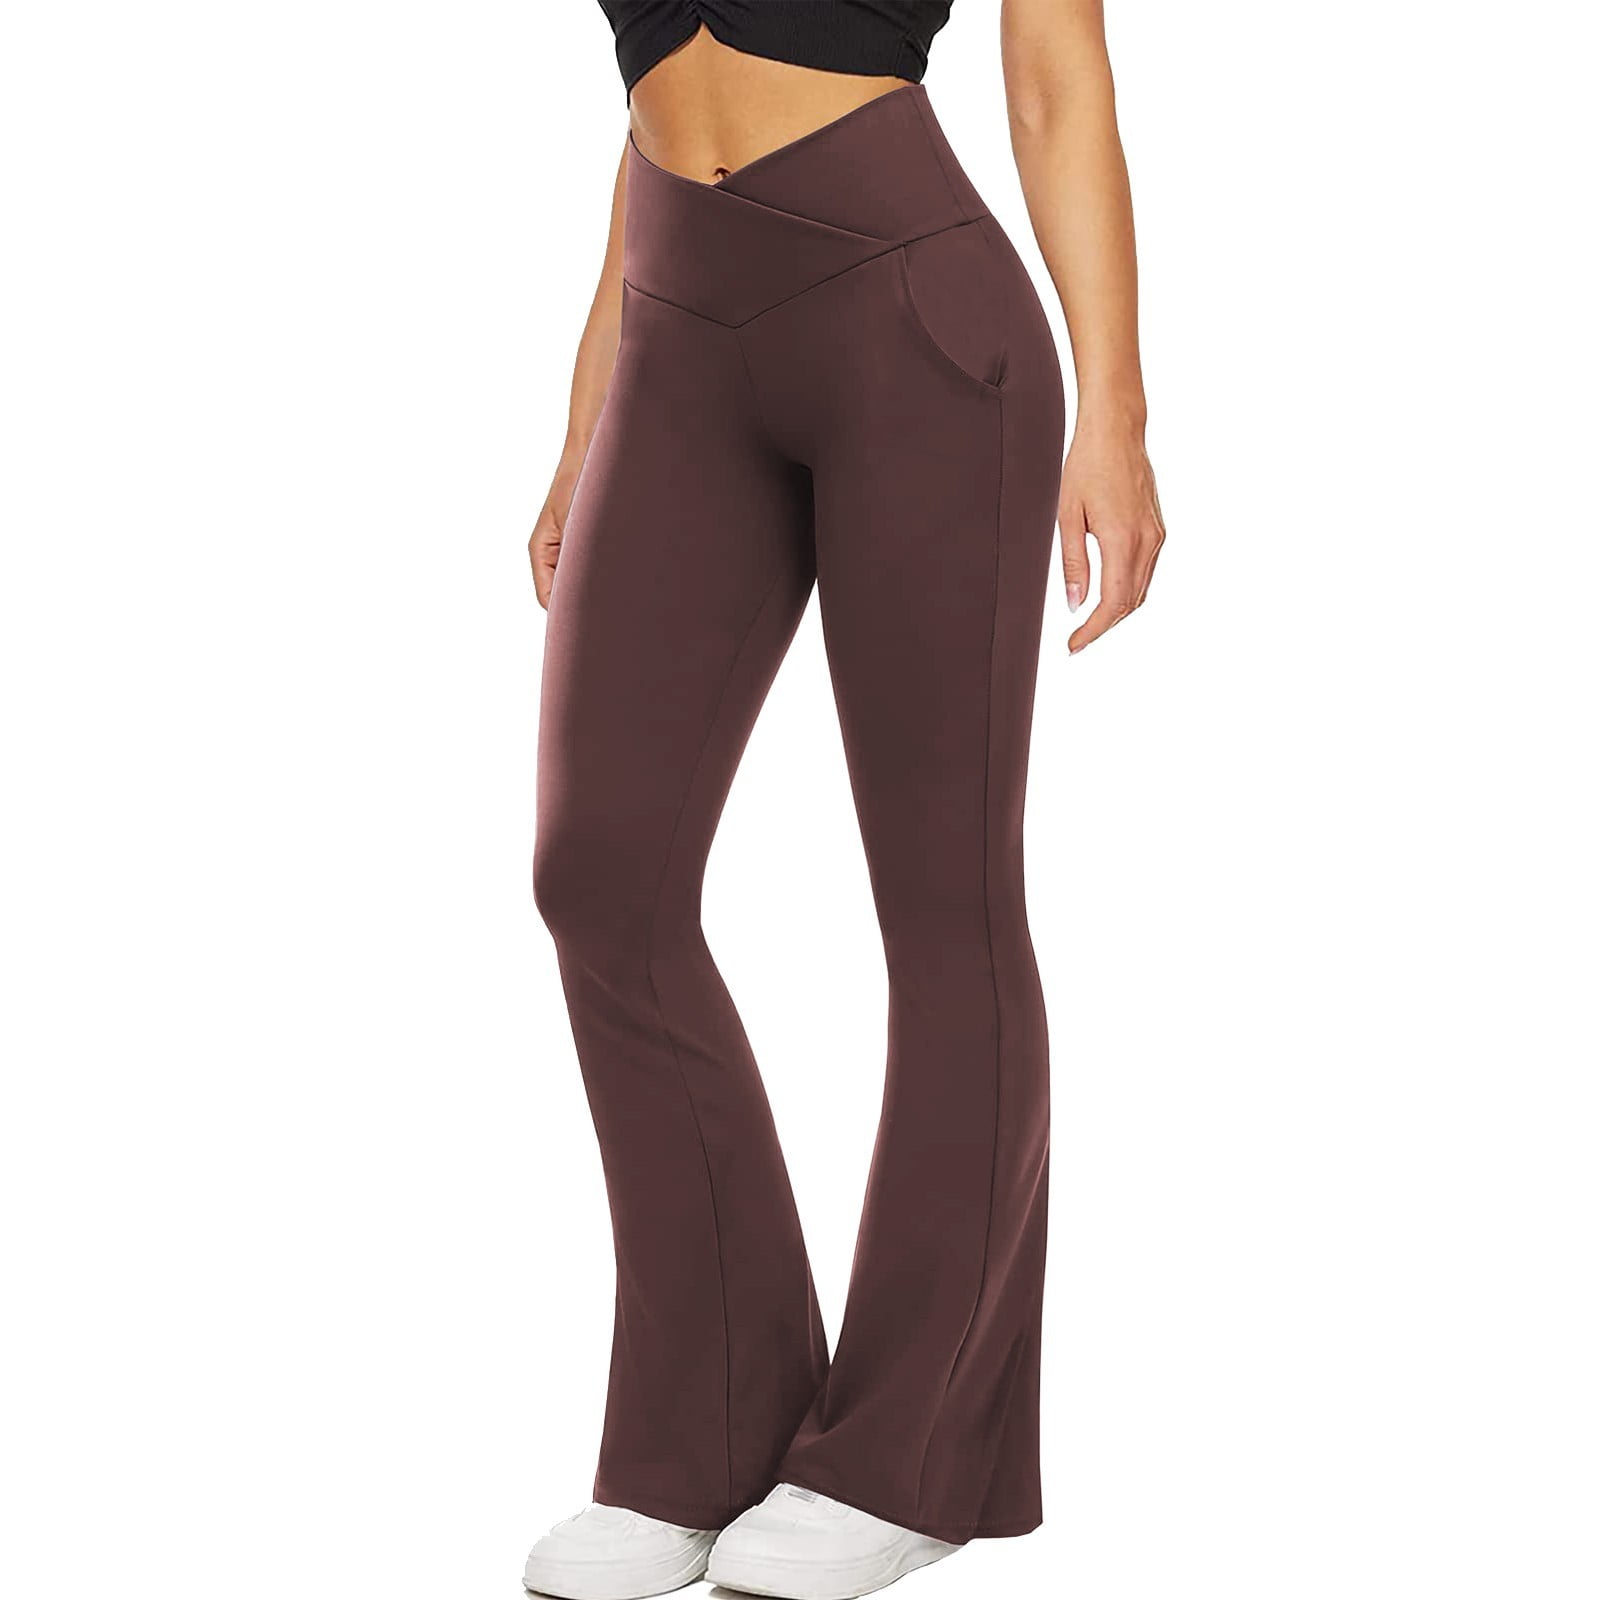  Women's Bootcut Yoga Pants High Waisted Crossover Flare  Leggings, Straight Leg Cross Waist Workout Yoga Flare Pants Brown :  Clothing, Shoes & Jewelry